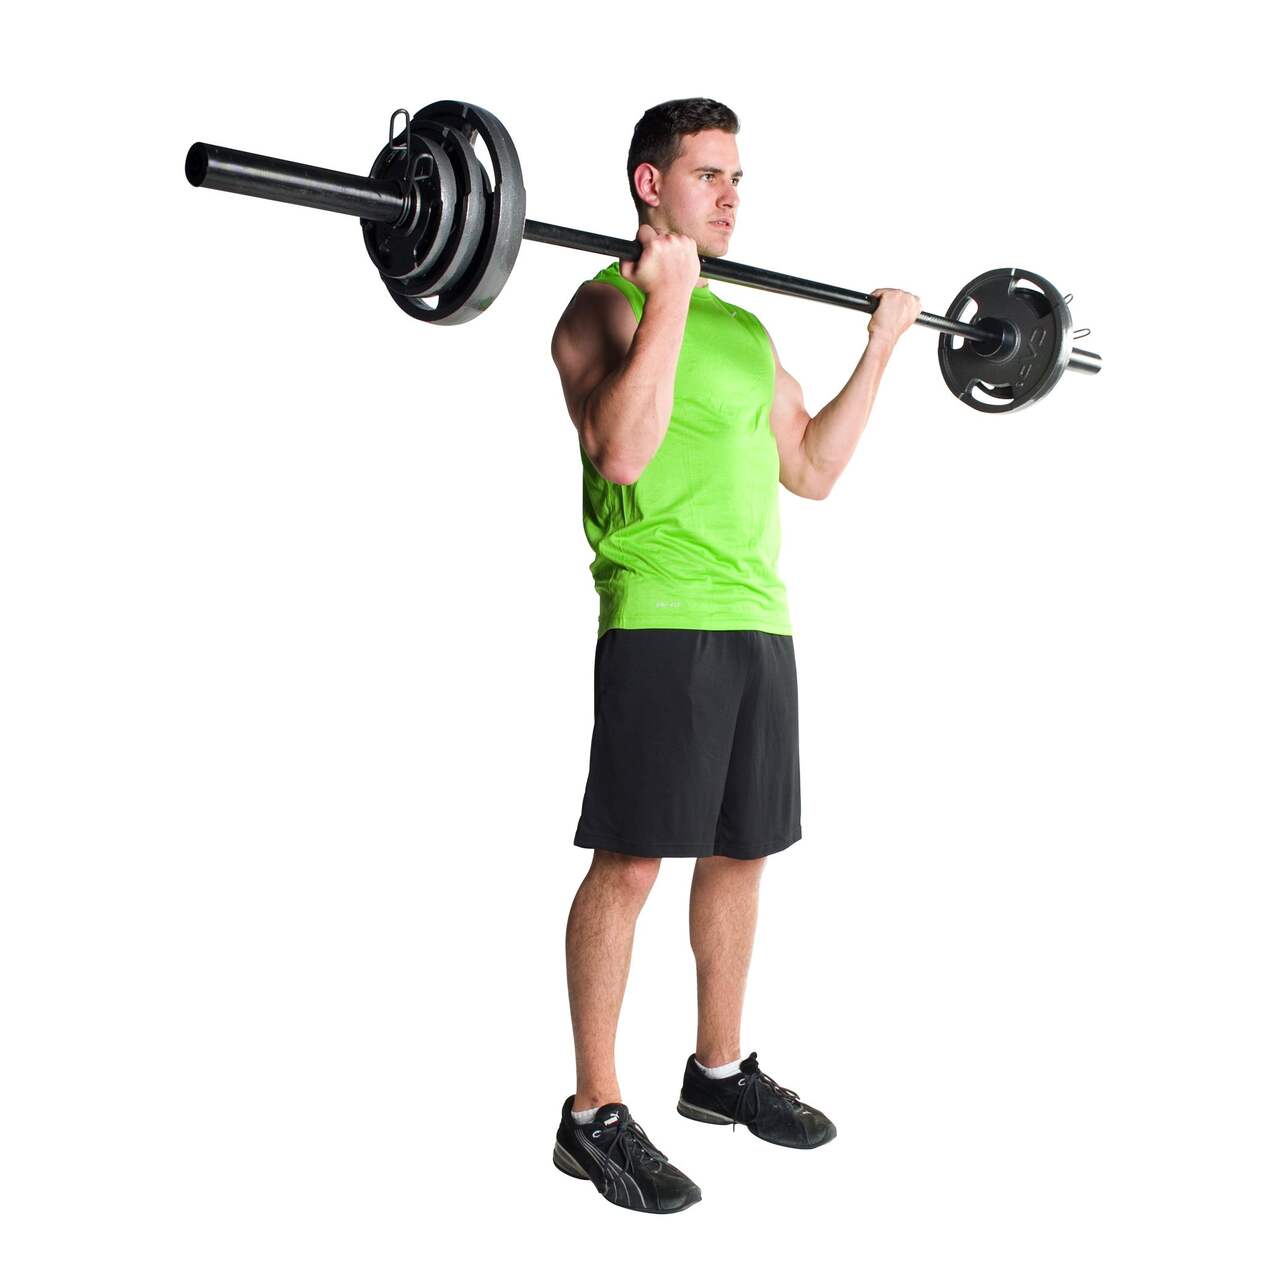 https://media-www.canadiantire.ca/product/playing/exercise/exercise-accessories/0840937/110lb-olympic-weight-set-48ef18ce-ab39-4e5d-aee6-35753f68e3a0-jpgrendition.jpg?imdensity=1&imwidth=1244&impolicy=mZoom